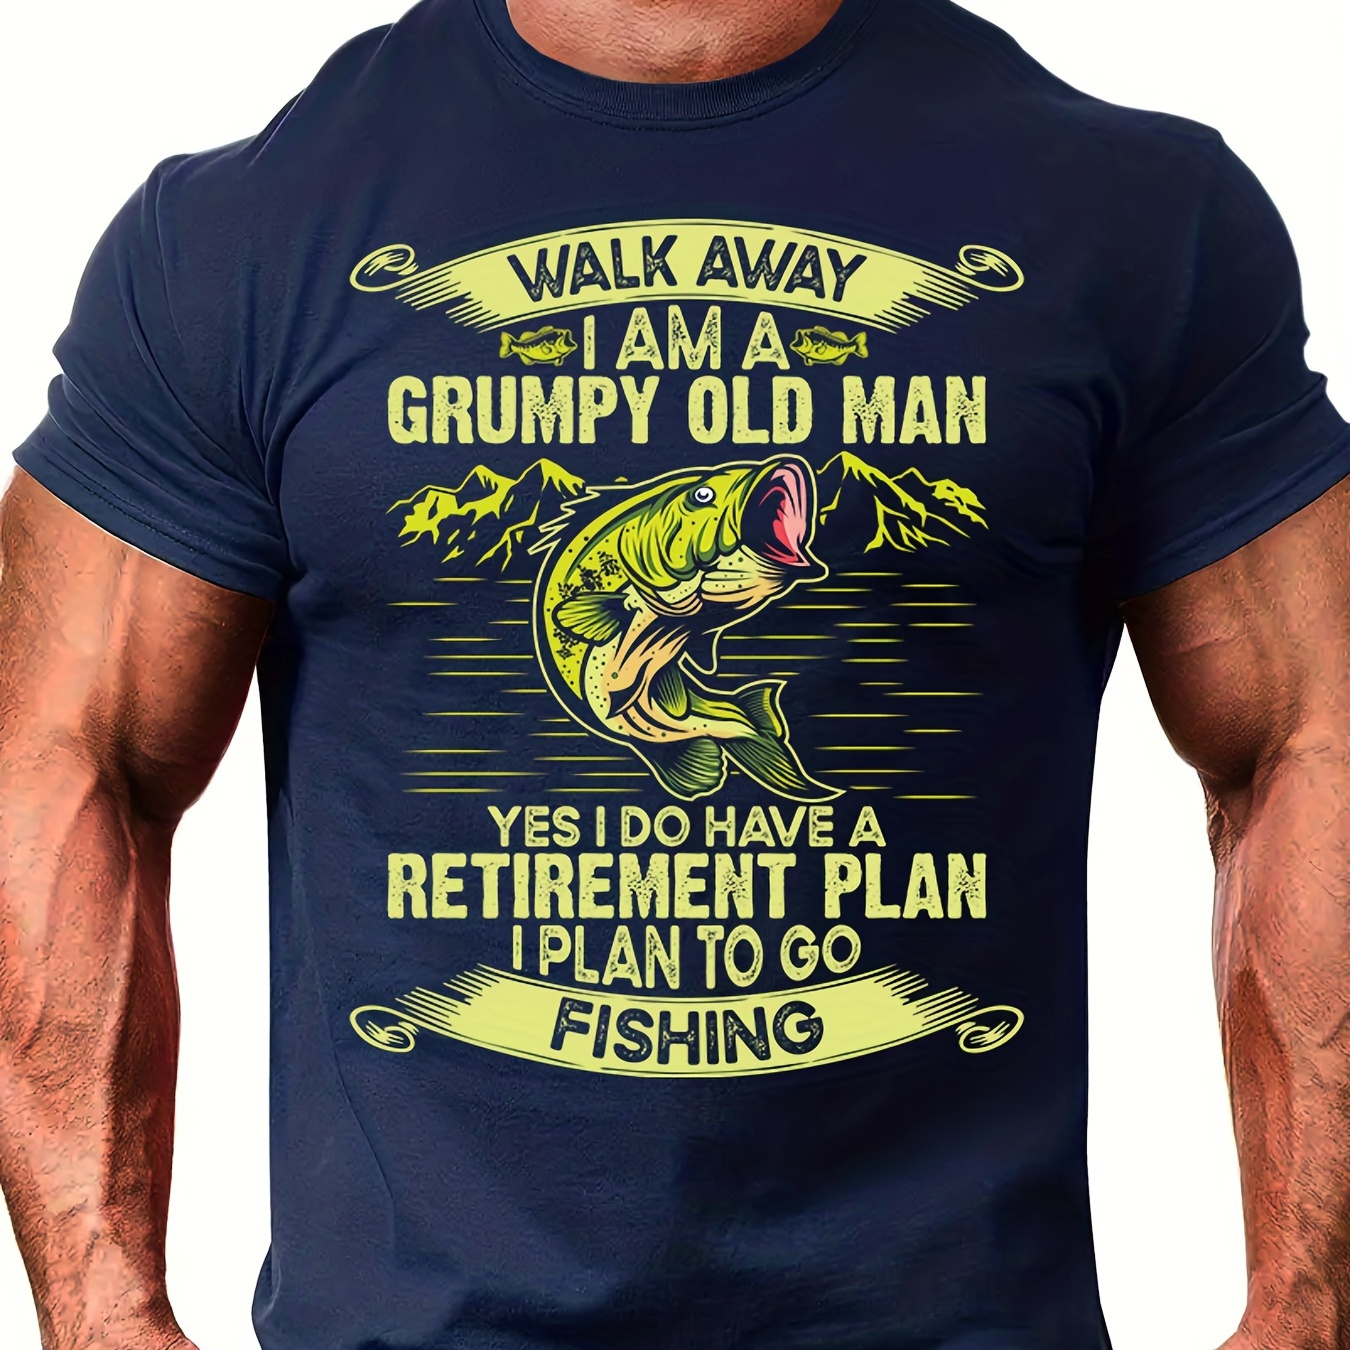 

Fishing Theme Pattern Print Men's Comfy Chic T-shirt, Graphic Tee Men's Summer Outdoor Clothes, Men's Clothing, Tops For Men, Gift For Men